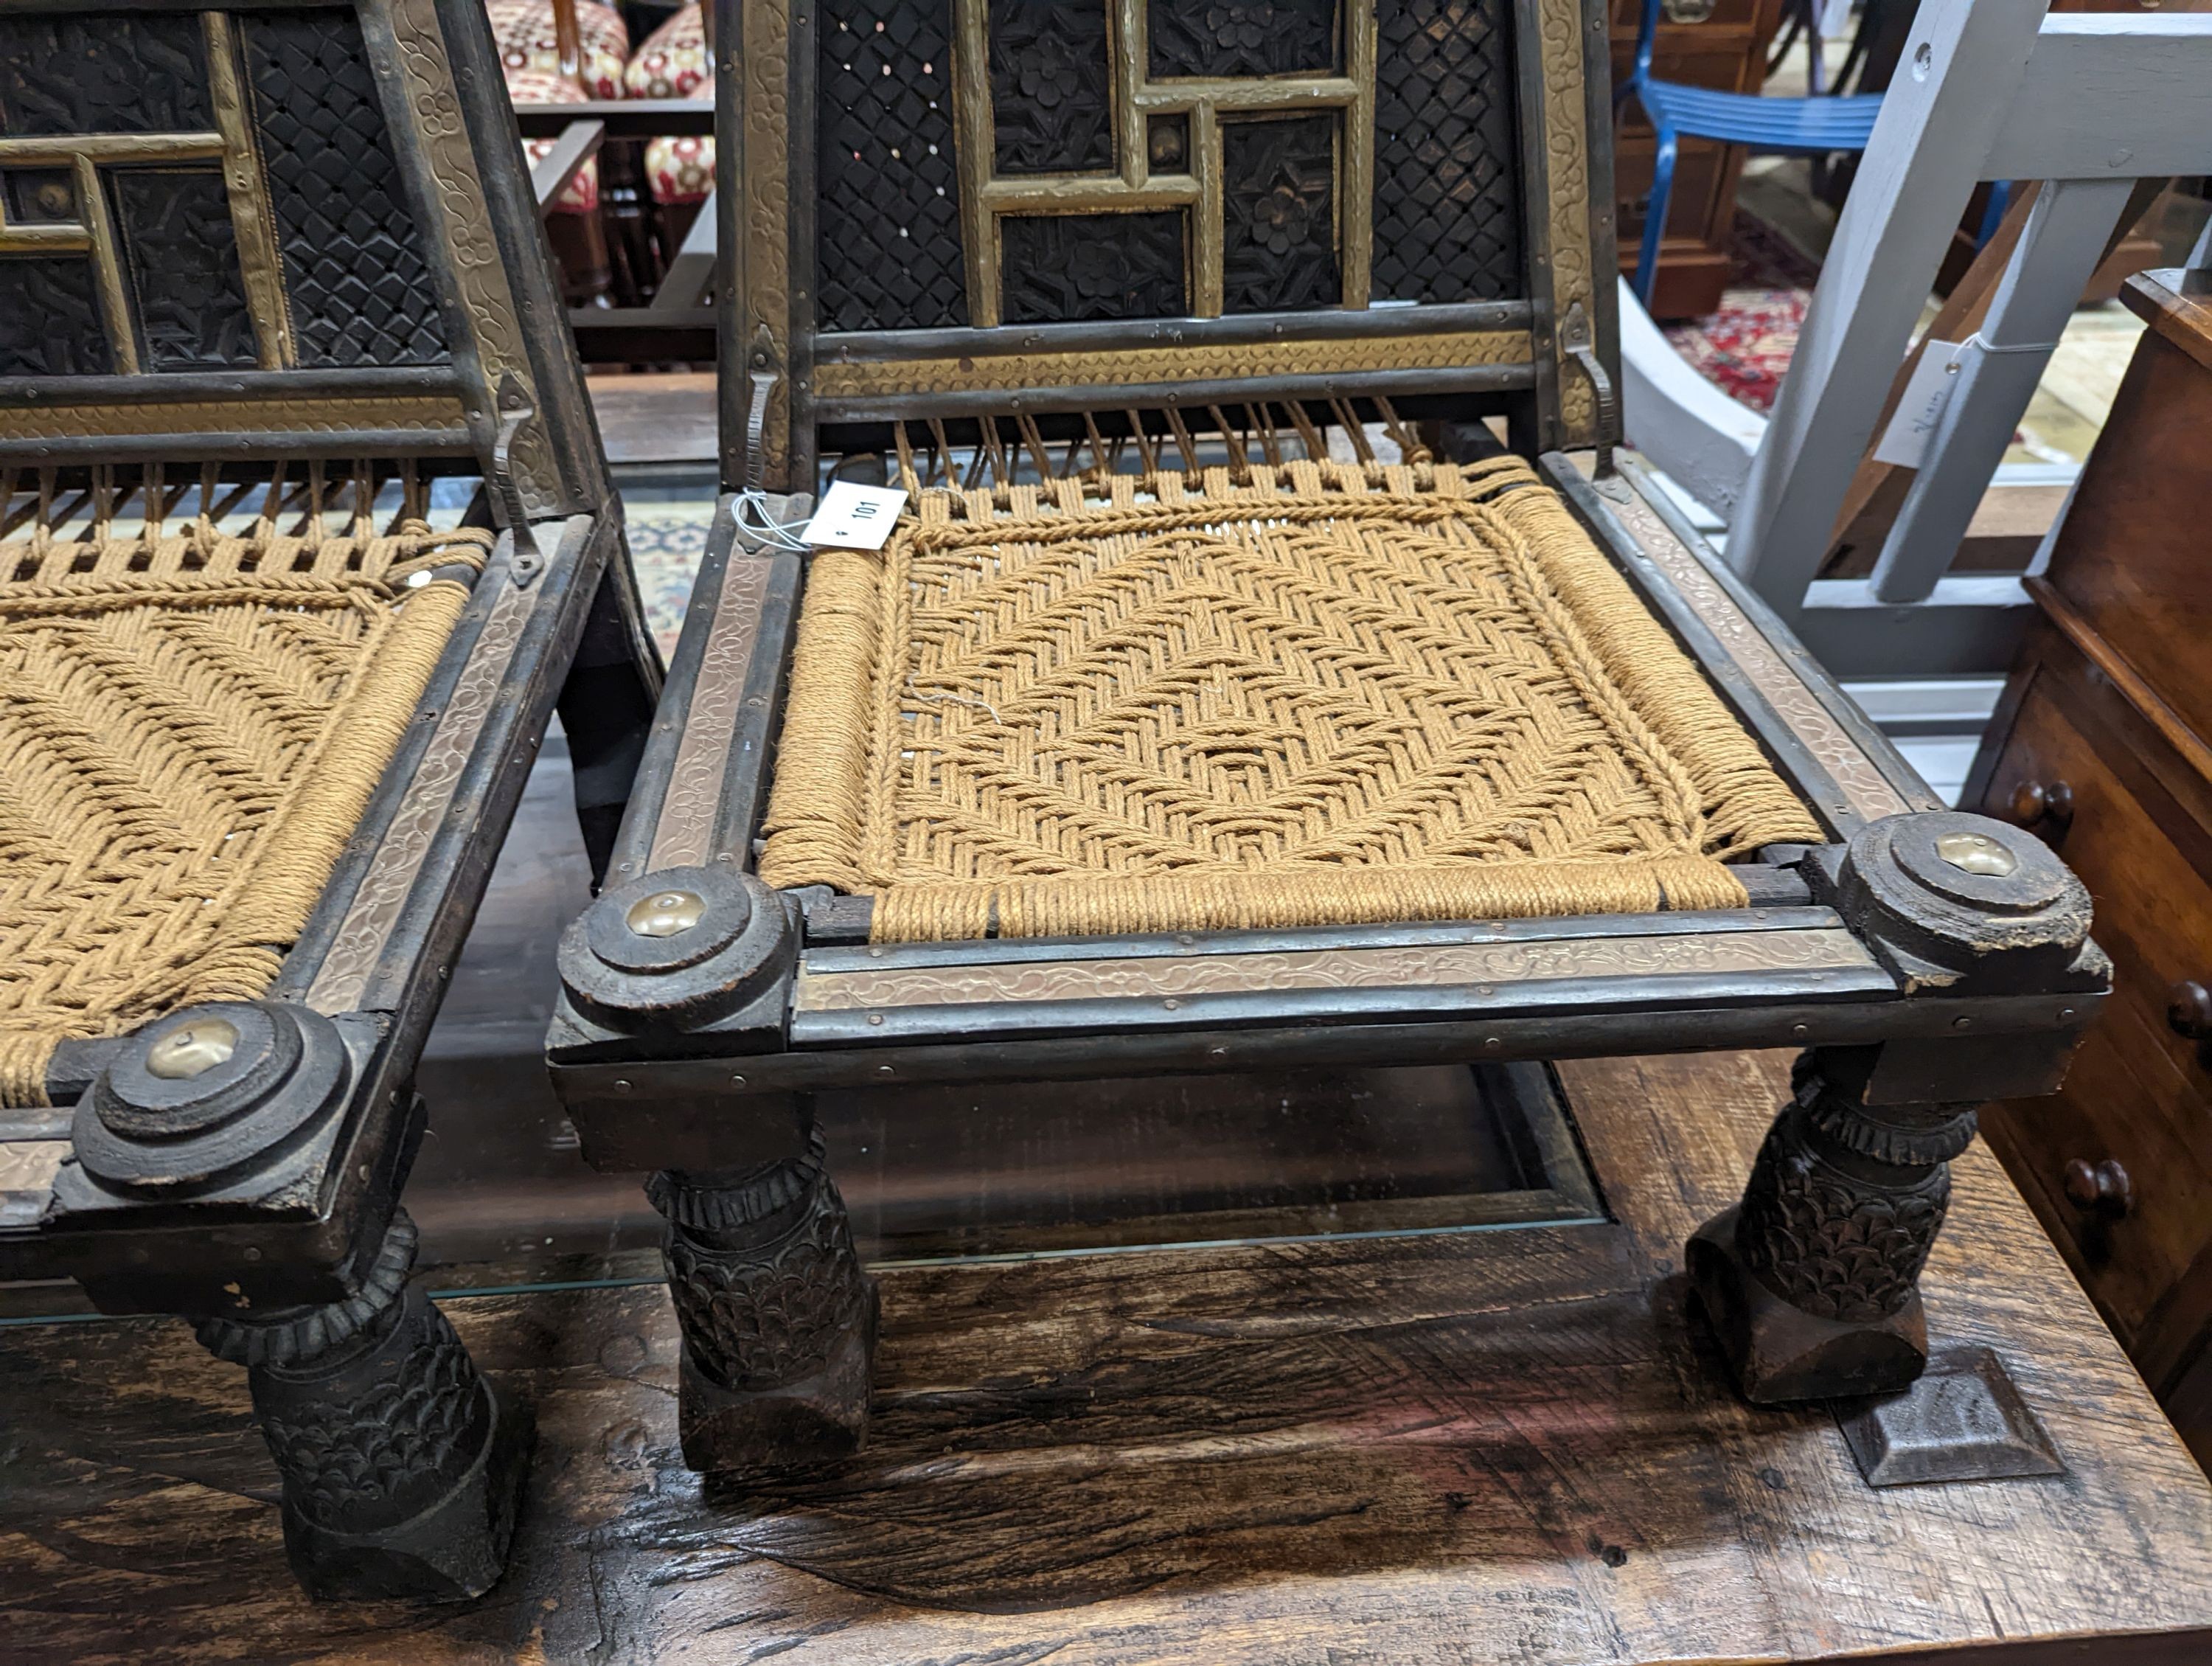 A pair of Afghan chip-carved and brass-mounted low seat chairs with woven seats, width 45cm, depth 45cm, height 76cm